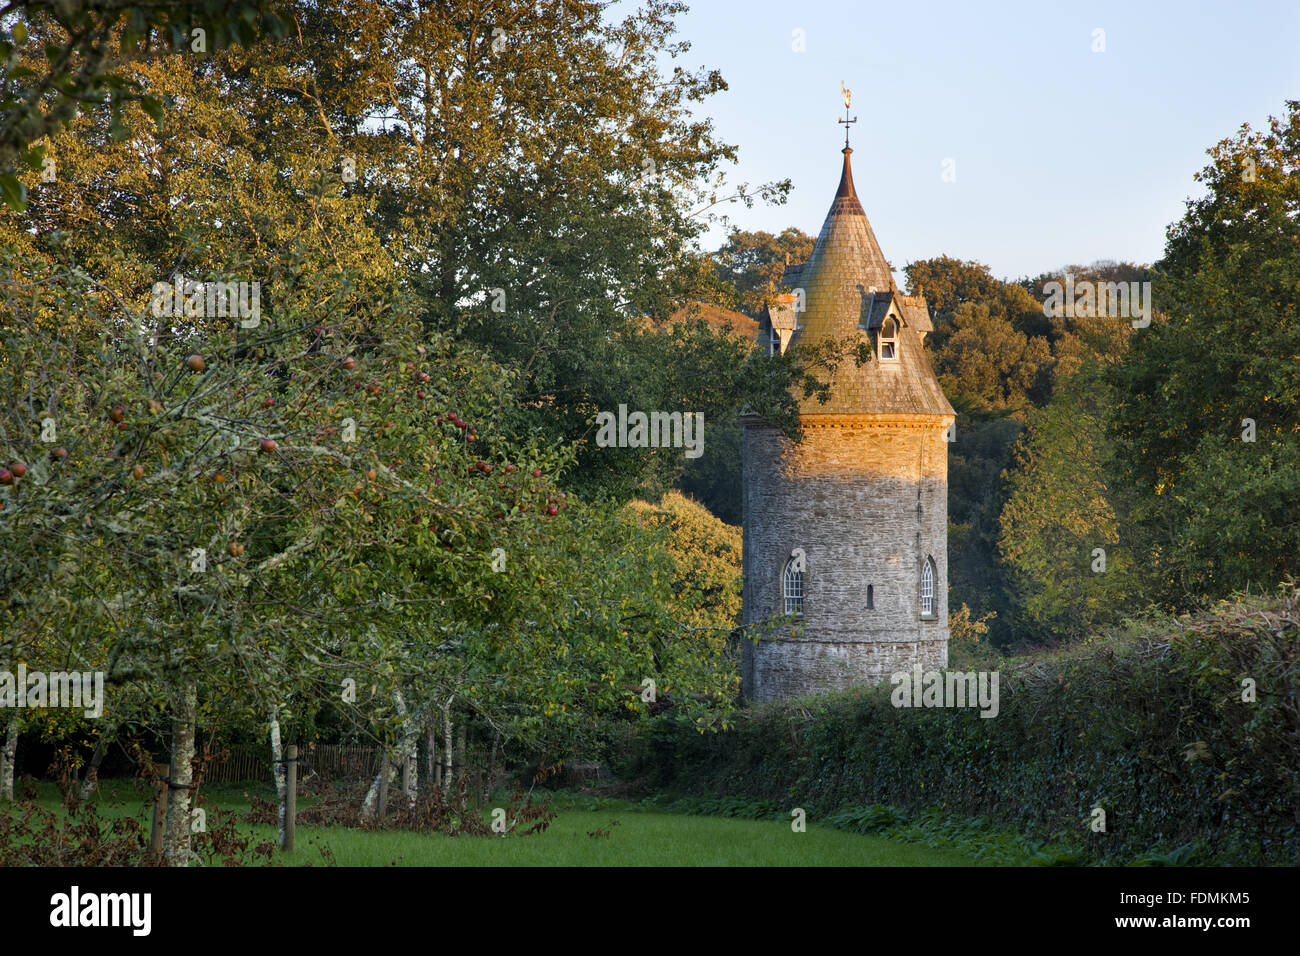 The Water Tower from the orchard at Trelissick Garden, Cornwall. The building was put up, probably in the 1820s, to provide water pressure for the house and garden. It is now a National Trust holiday cottage. Stock Photo